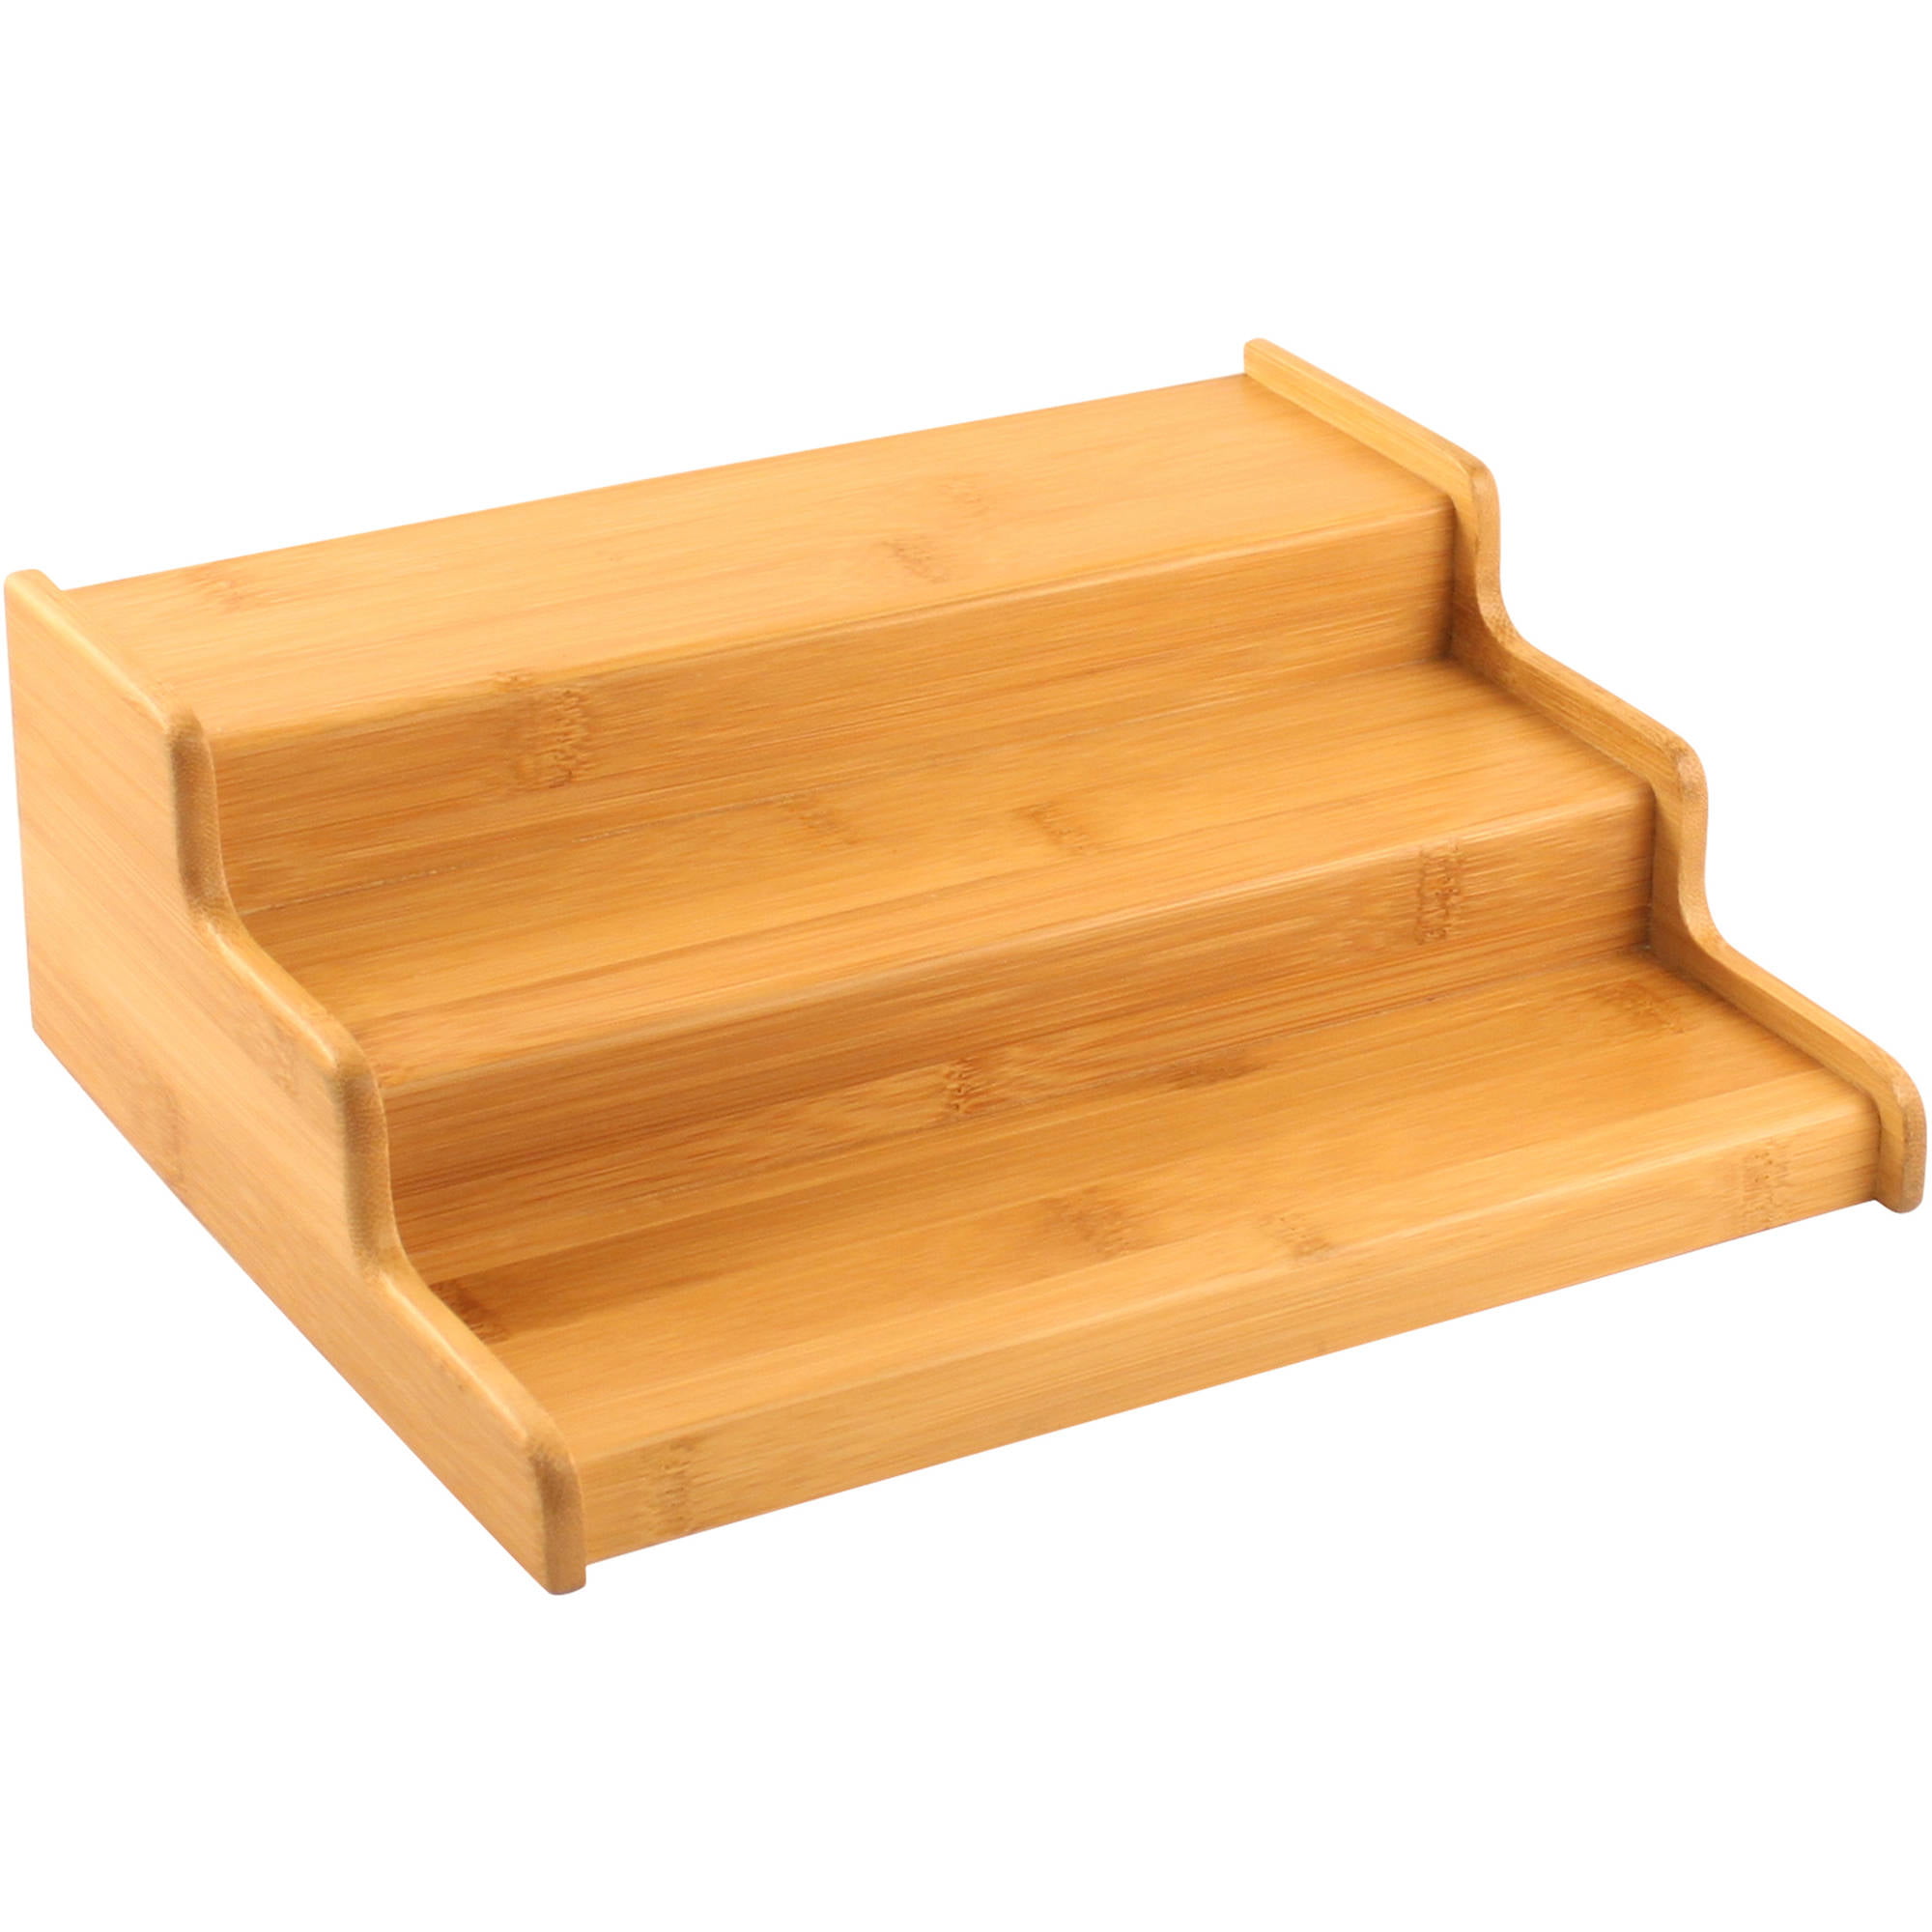 Details about   3 TIER BAMBOO SPICE BOX TRI-LEVEL STORAGE FREE STANDING NATURAL UNFINISHED WOOD